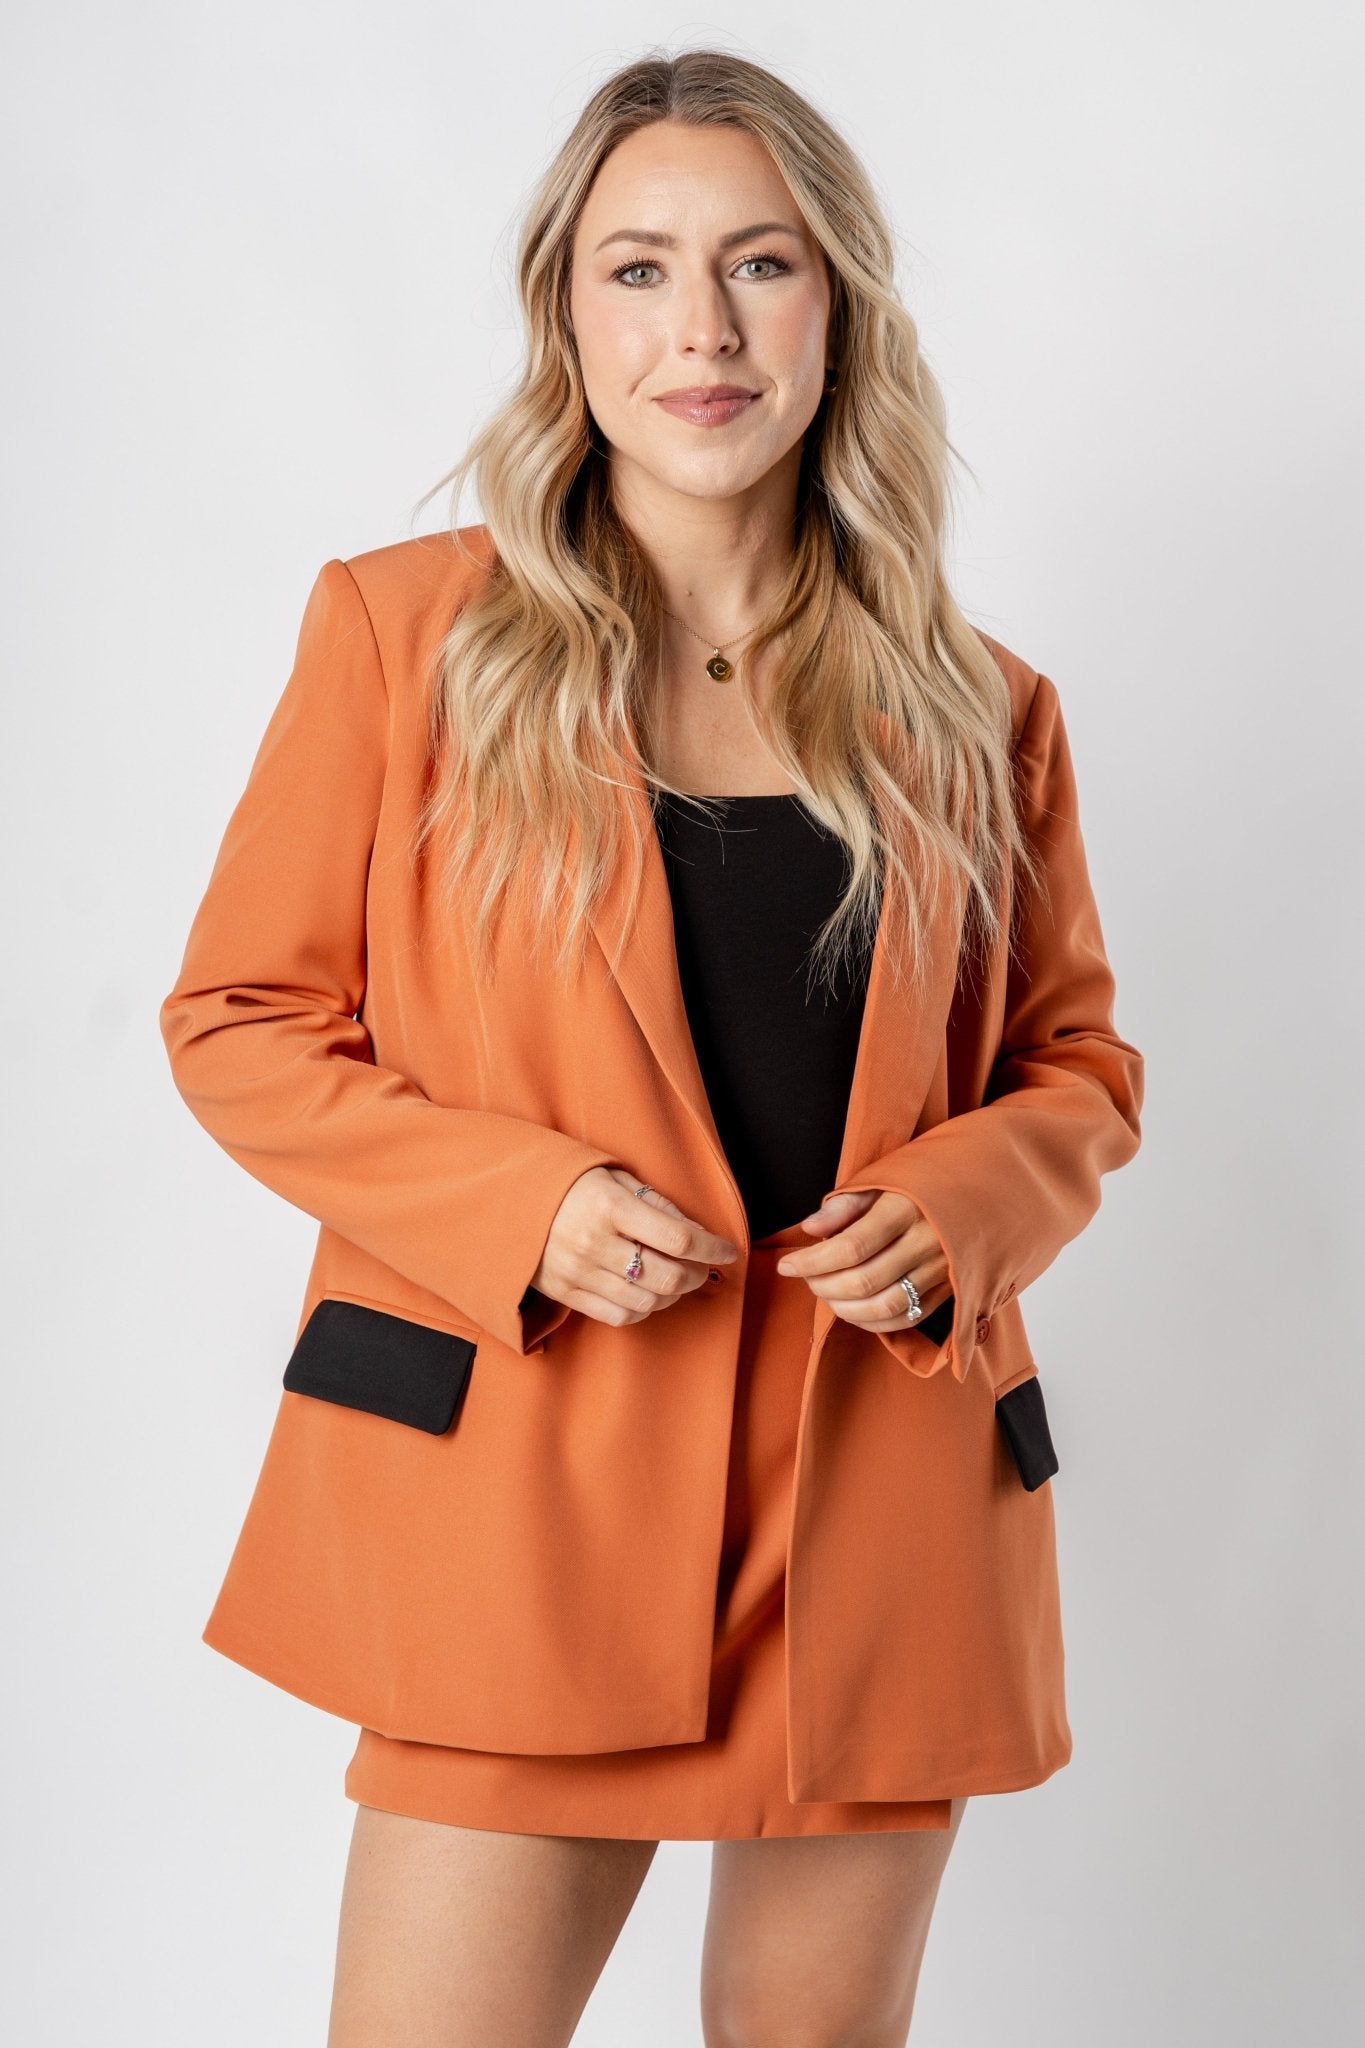 Color block blazer rust/black – Affordable Blazers | Cute Black Jackets at Lush Fashion Lounge Boutique in Oklahoma City